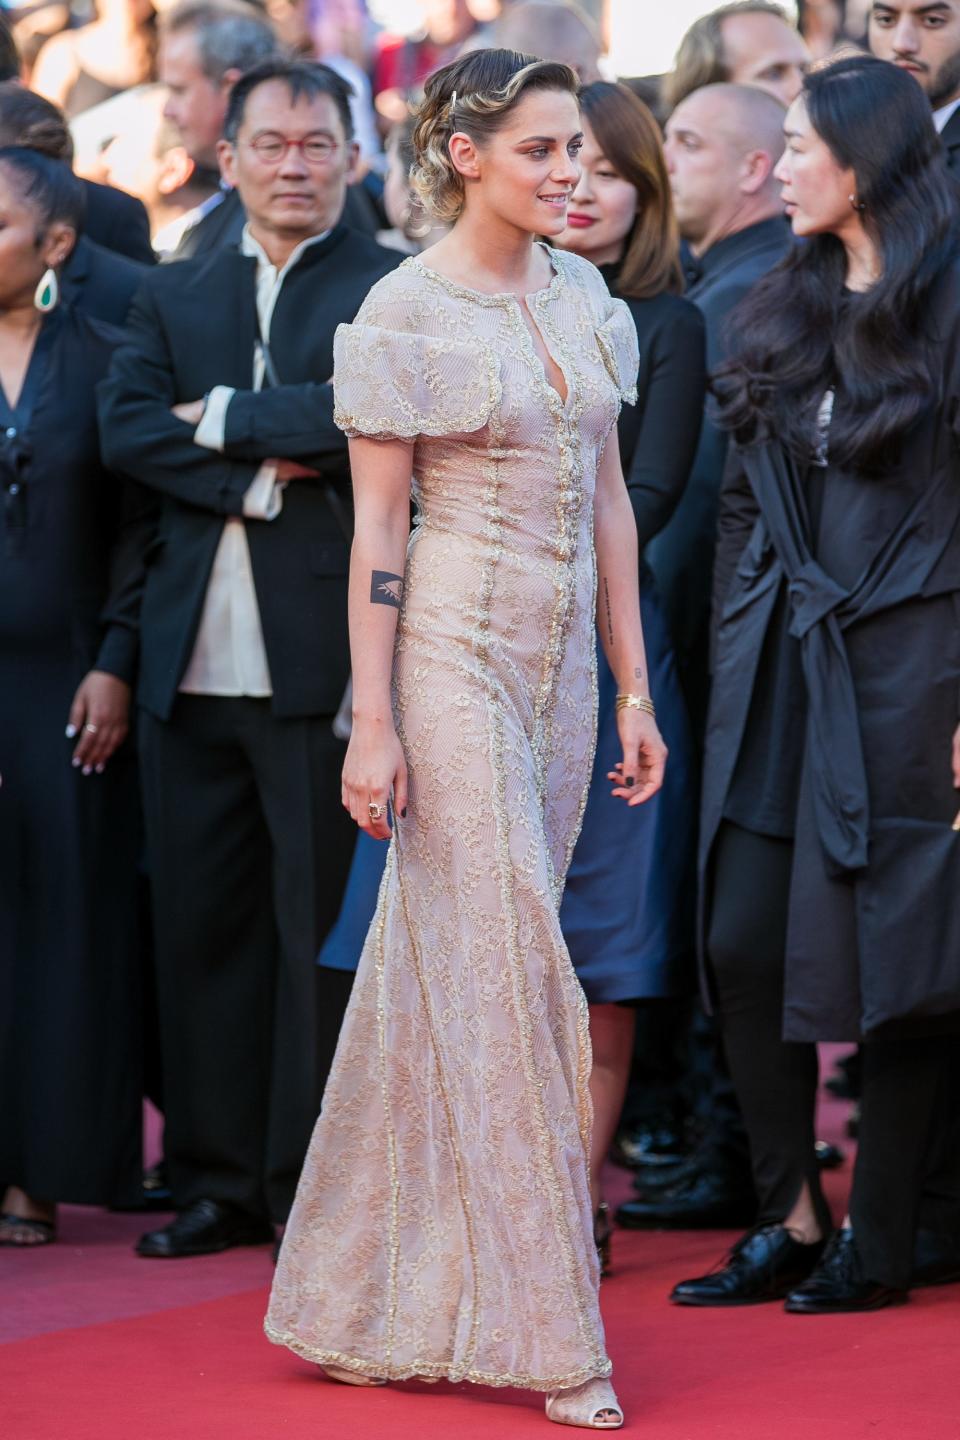 Kristen Stewart attends the Closing Ceremony during the 71st annual Cannes Film Festival.